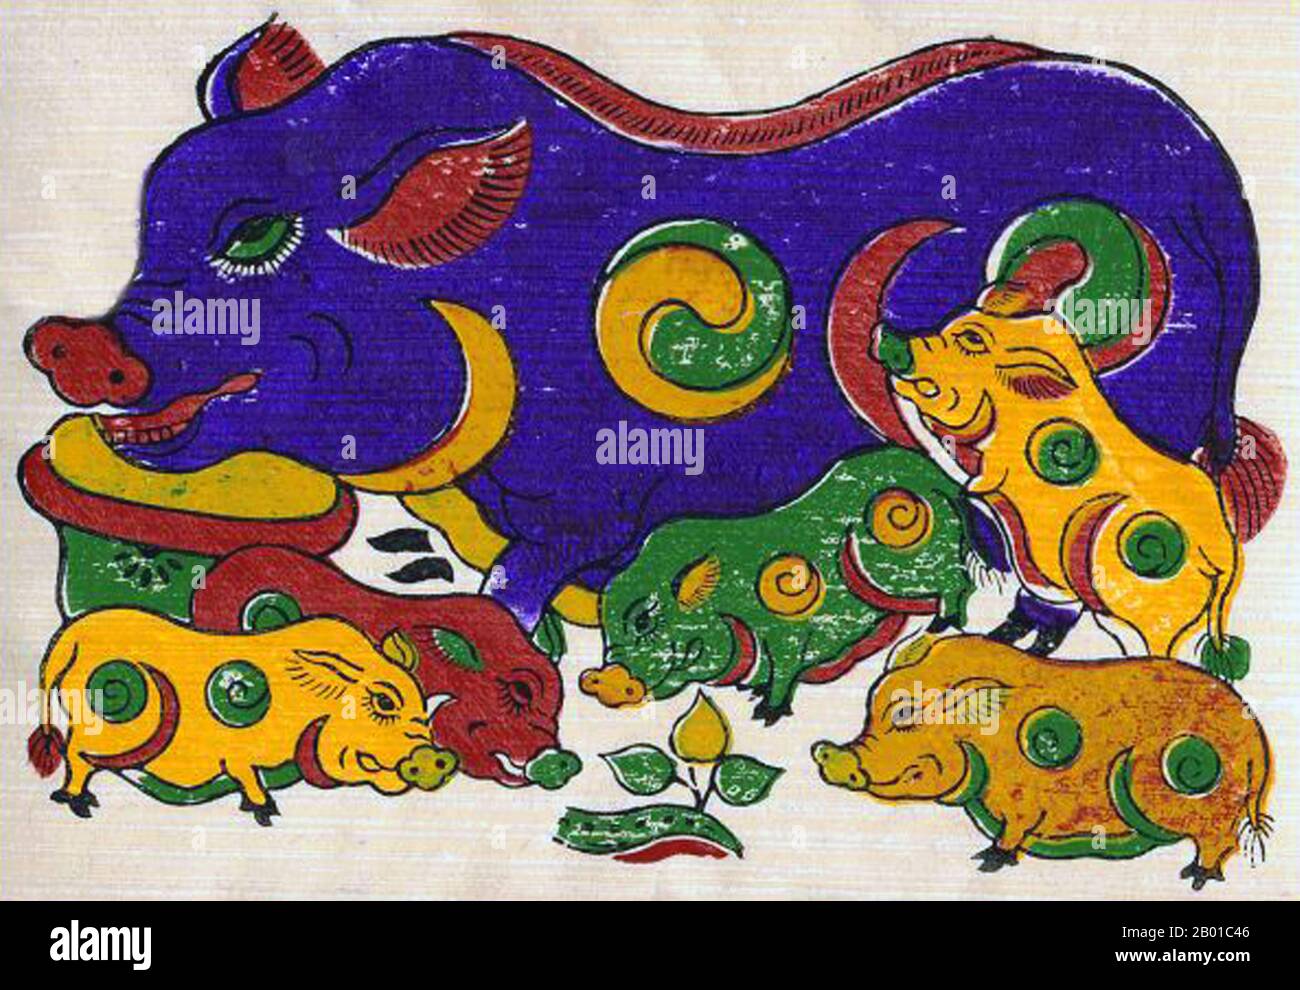 Vietnam: A mother pig and her litter - traditional woodblock painting from Dong Ho village, Bac Ninh Province.  Dong Ho painting (Vietnamese: Tranh Đông Hồ or Tranh làng Hồ), full name Dong Ho folk woodcut painting (Tranh khắc gỗ dân gian Đông Hồ) is a genre of Vietnamese woodcut paintings originating from Dong Ho village (làng Đông Hồ) in Bac Ninh Province, Vietnam  Using the traditional điệp paper and colours derived from nature, craftsmen print Dong Ho pictures of different themes from good luck wishes, historical figures to everyday activities and folk allegories. Stock Photo